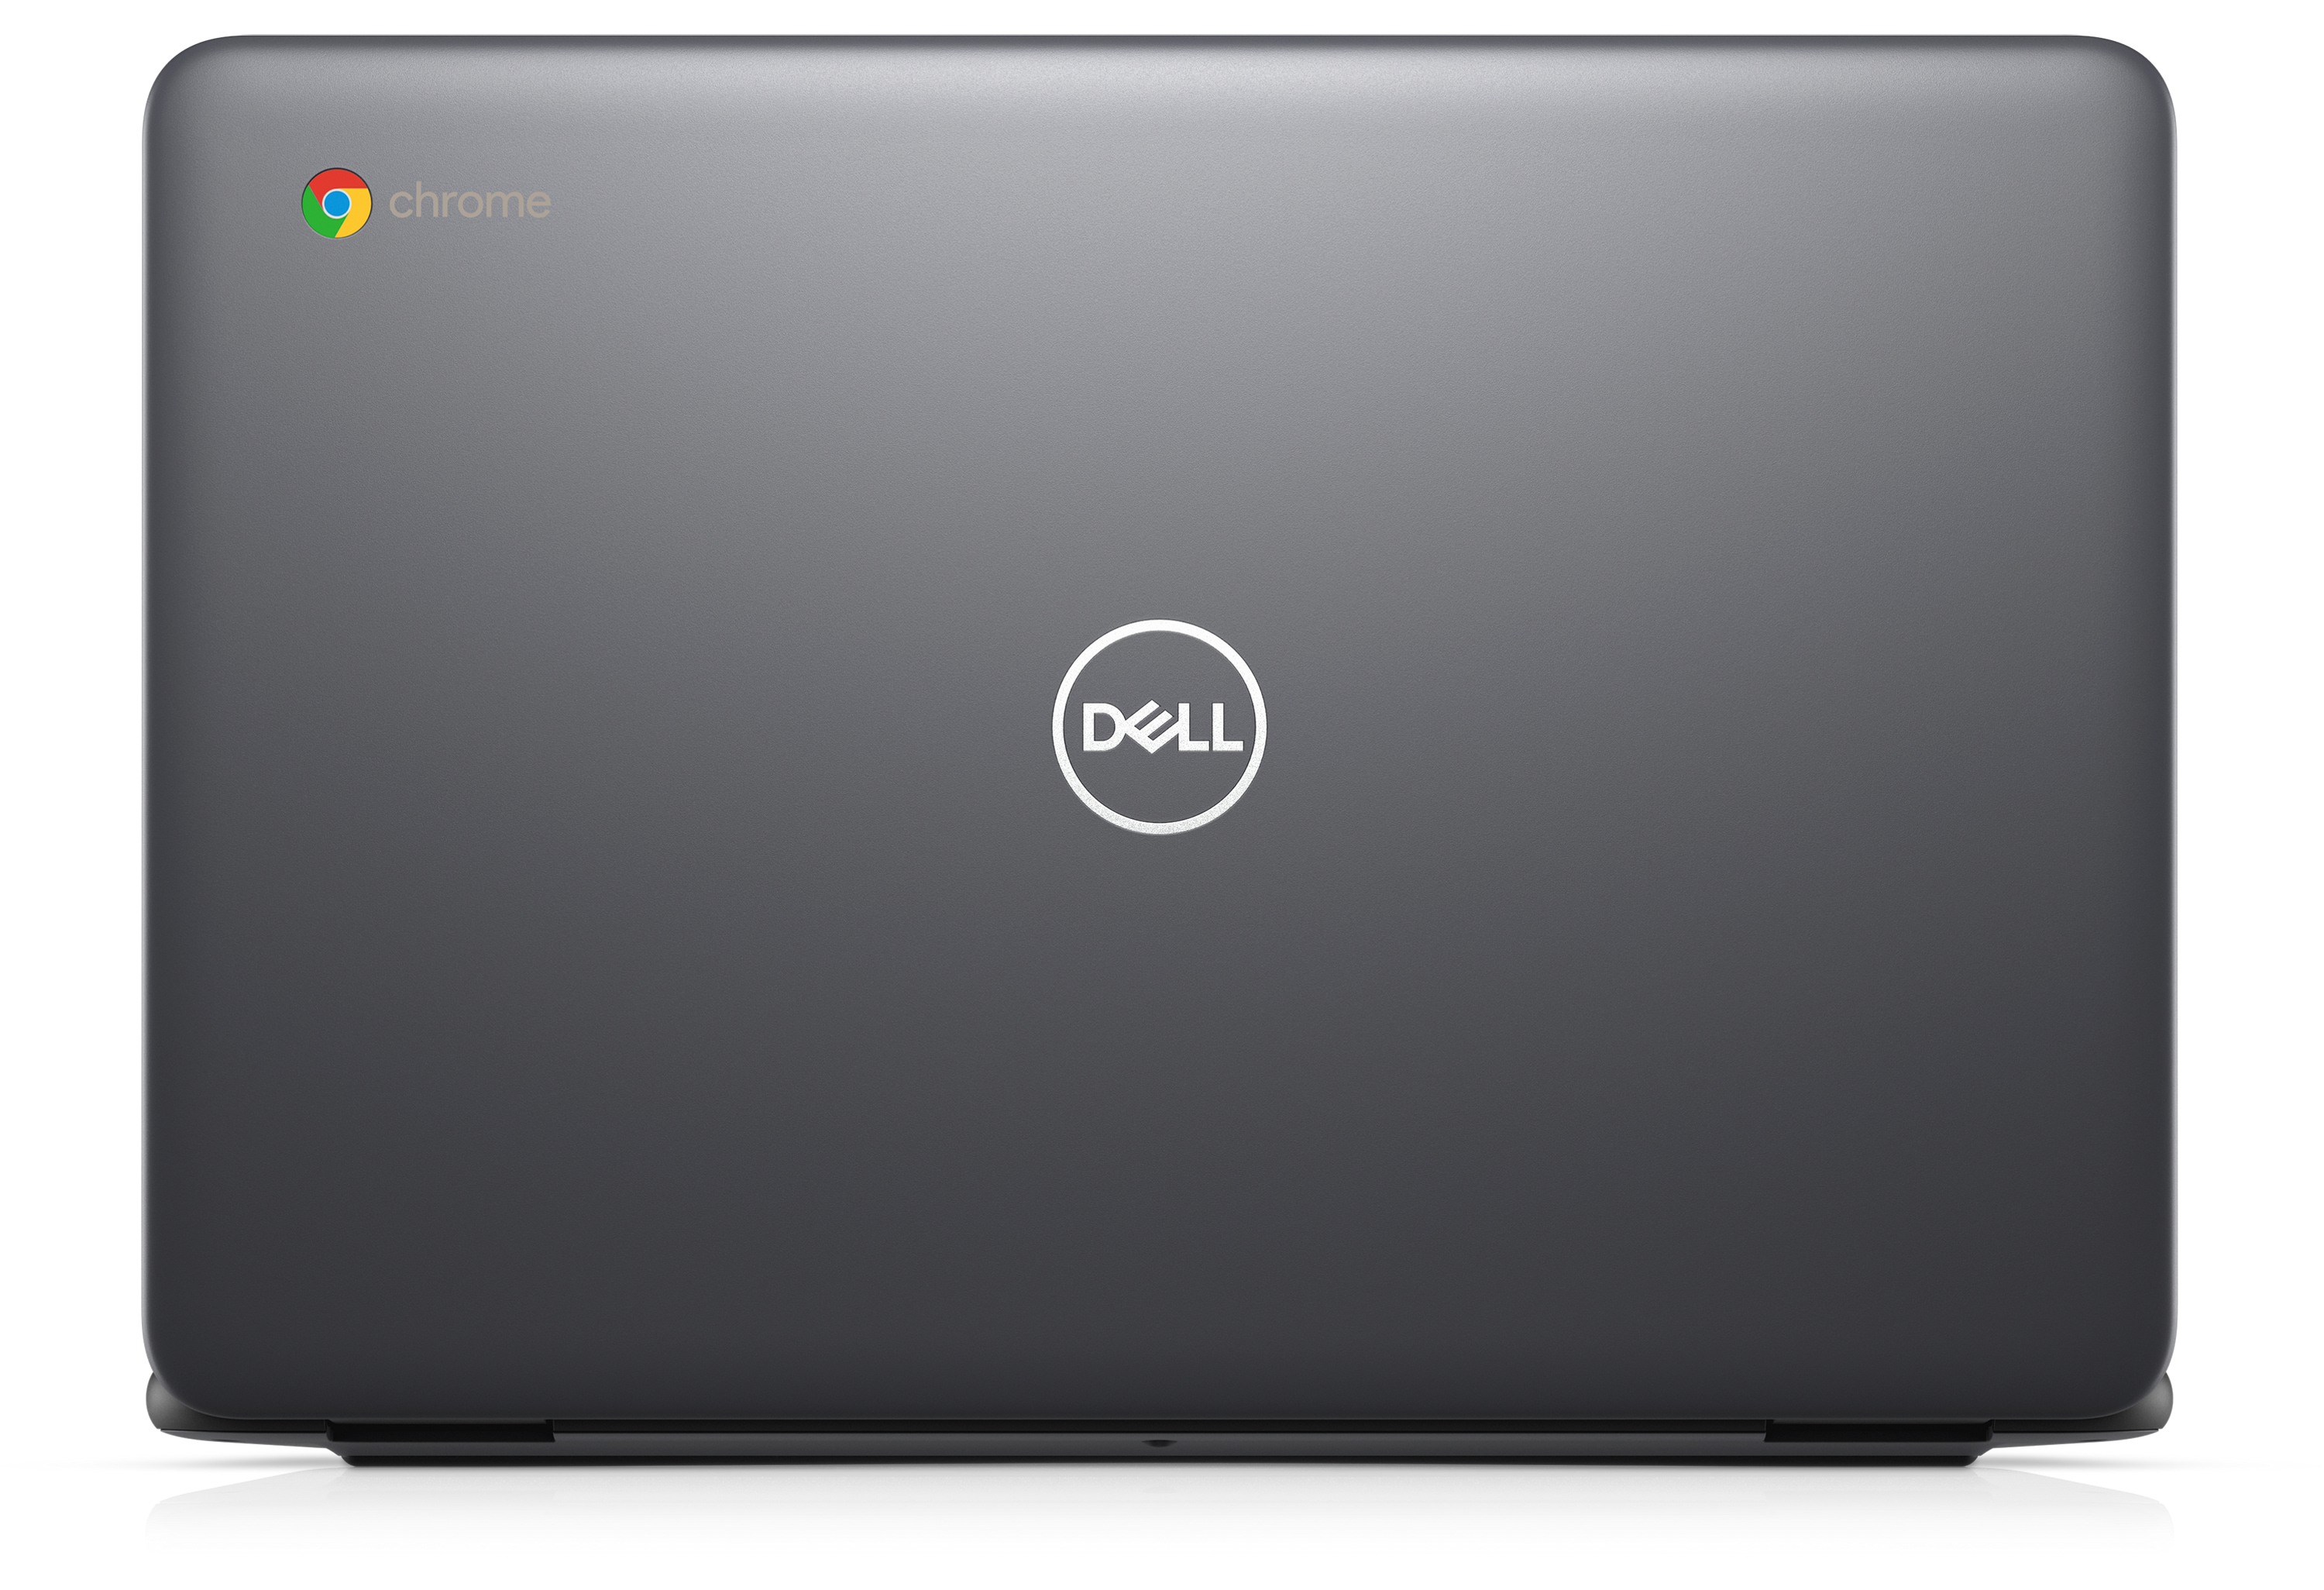 Dell Chromebook 3100 11 inch Laptop for Students | Dell USA